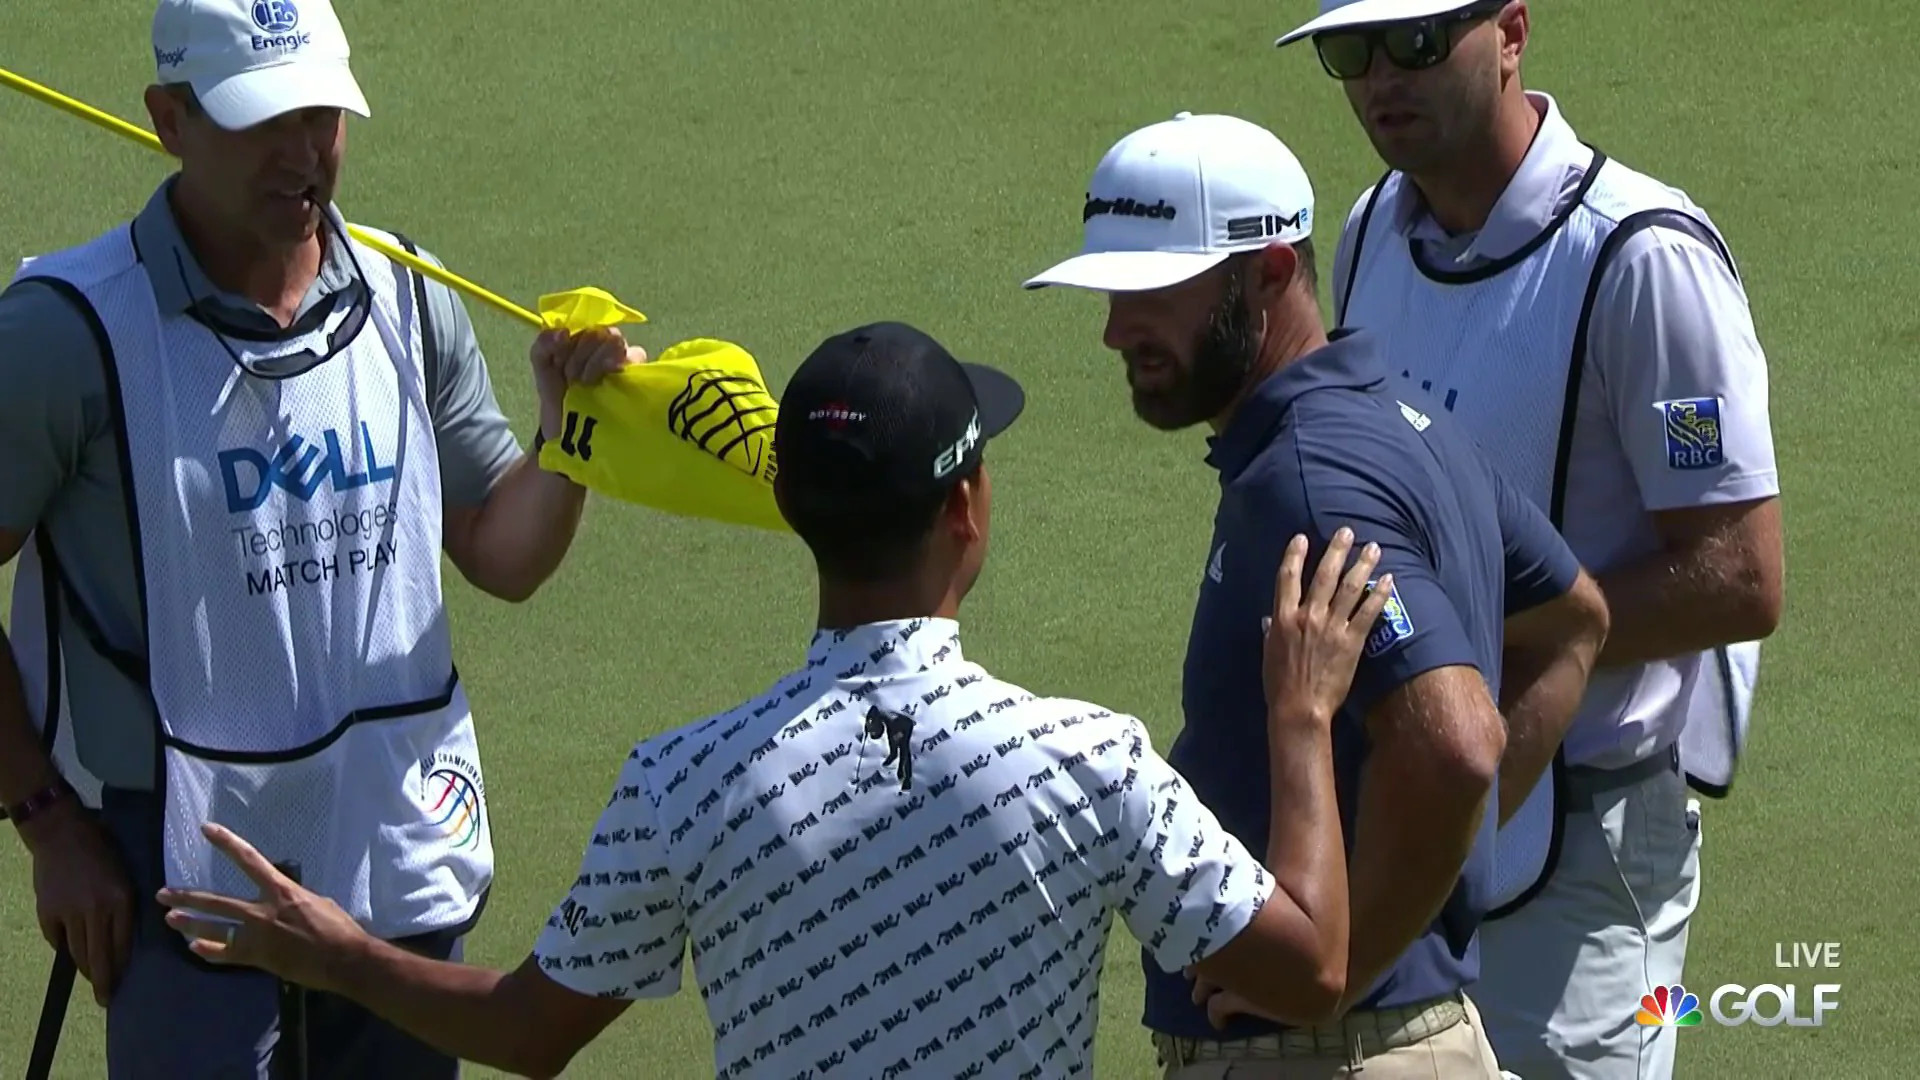 Testy situation between Dustin Johnson and Kevin Na regarding conceded putt